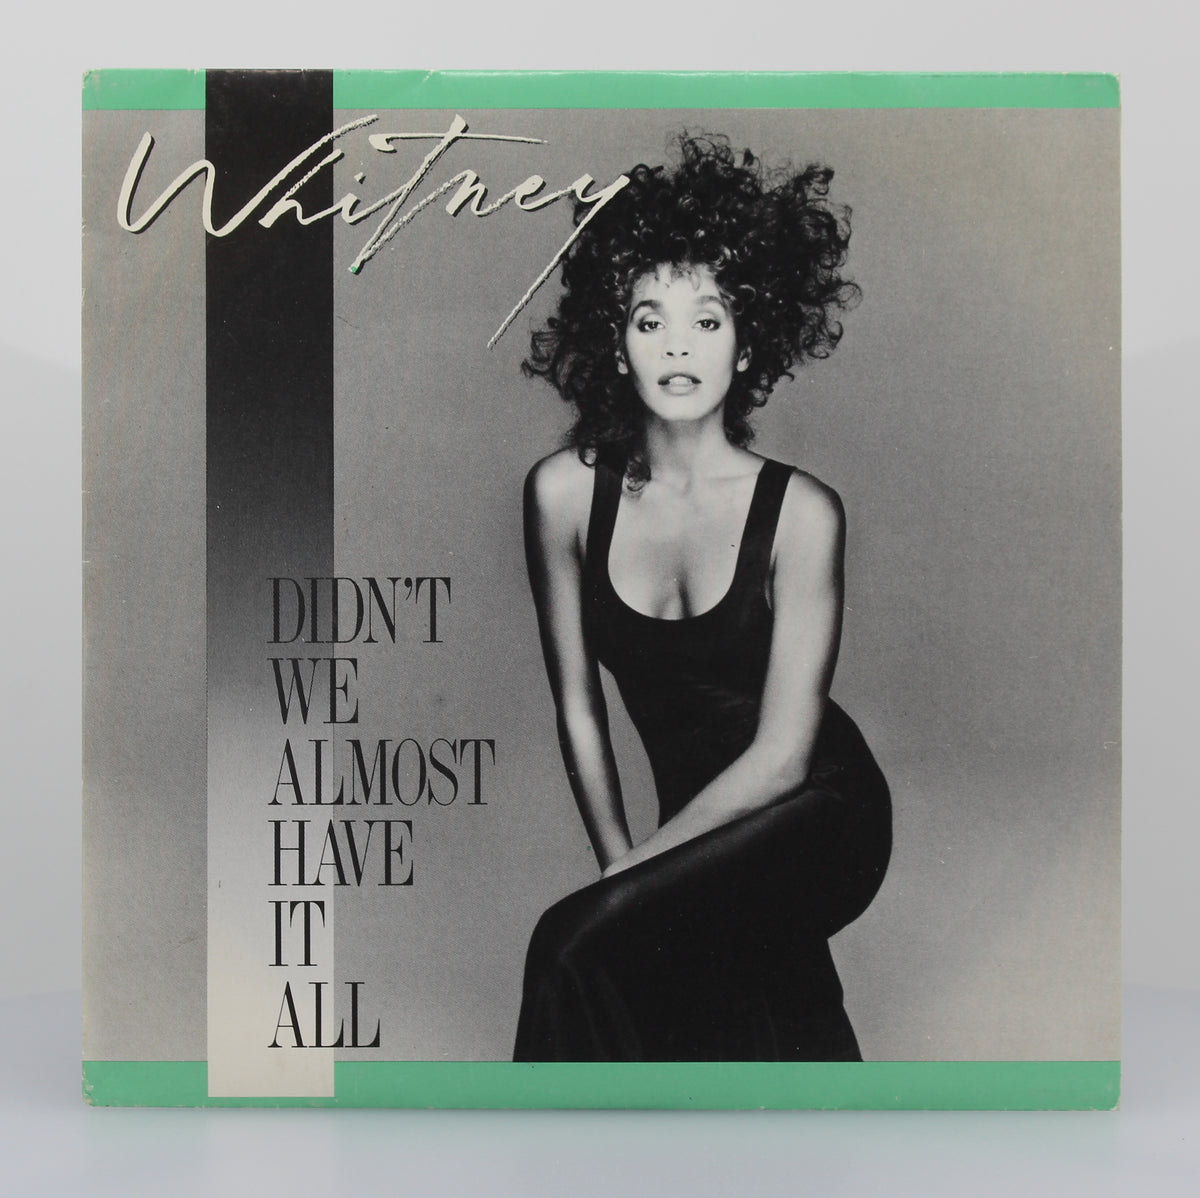 Whitney Houston – Didn&#39;t We Almost Have It All, Vinyl, 7&quot;, Single, Spain 1987